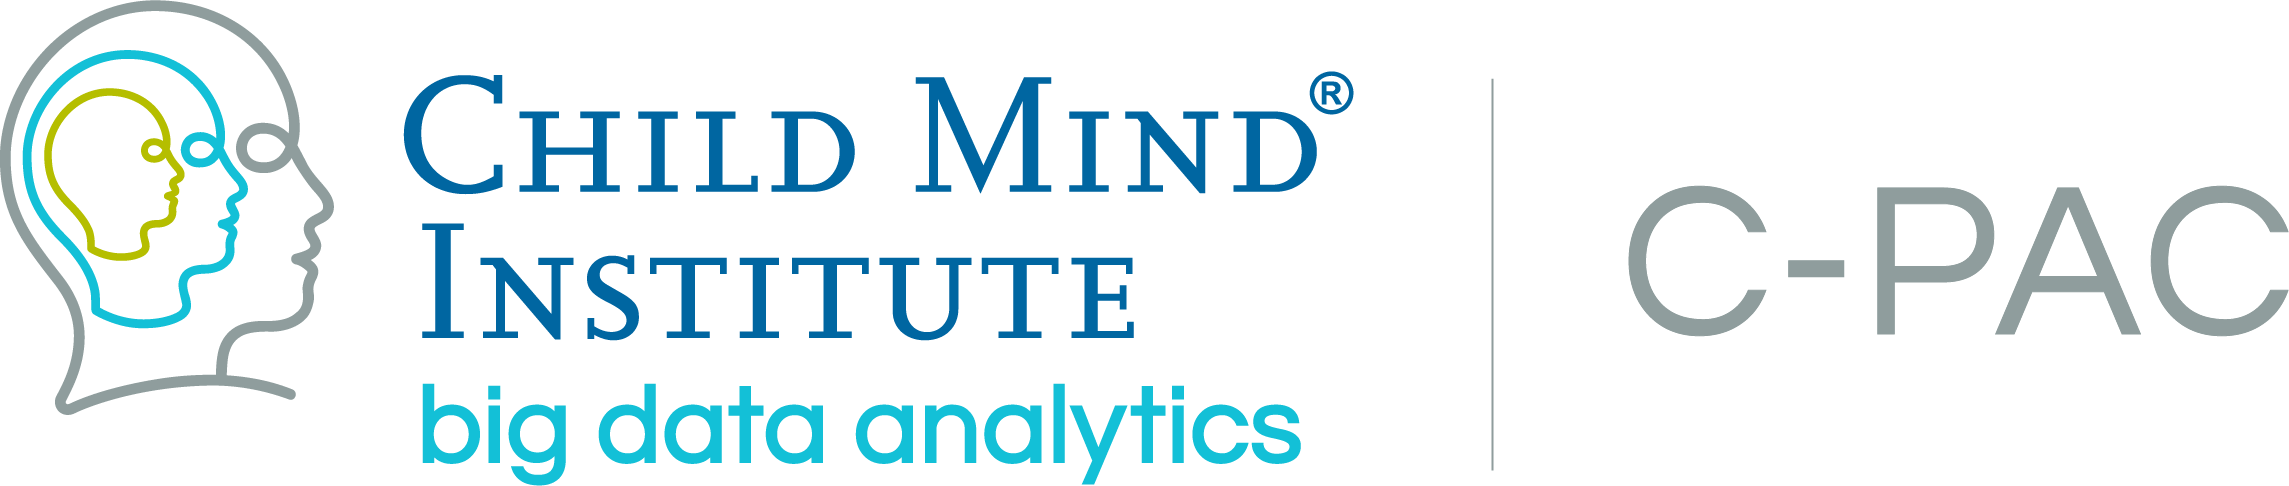 Configurable Pipeline for the Analysis of Connectomes - Child Mind Institute C-PAC